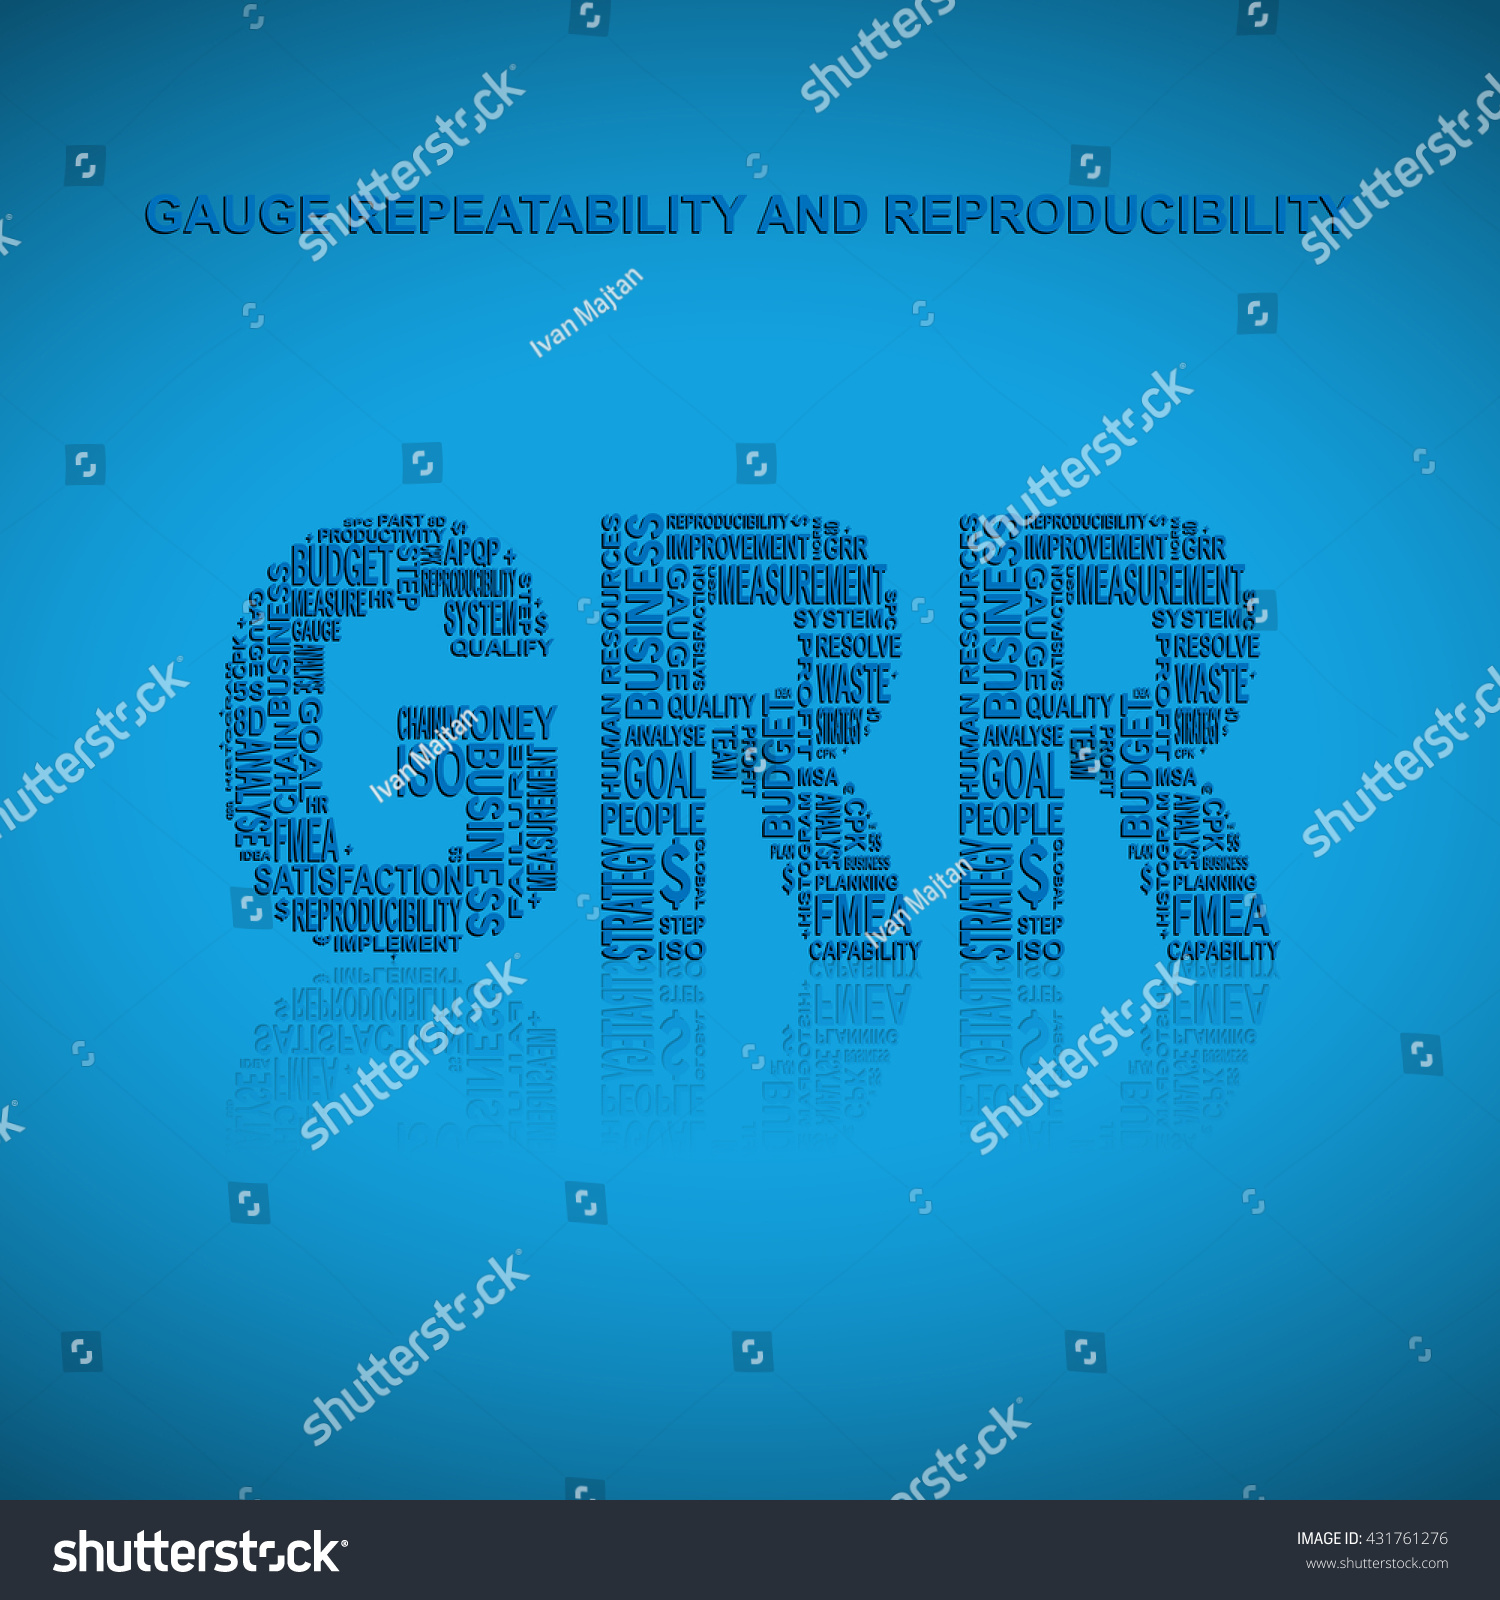 Gauge Repeatability Reproducibility Typography Background Blue